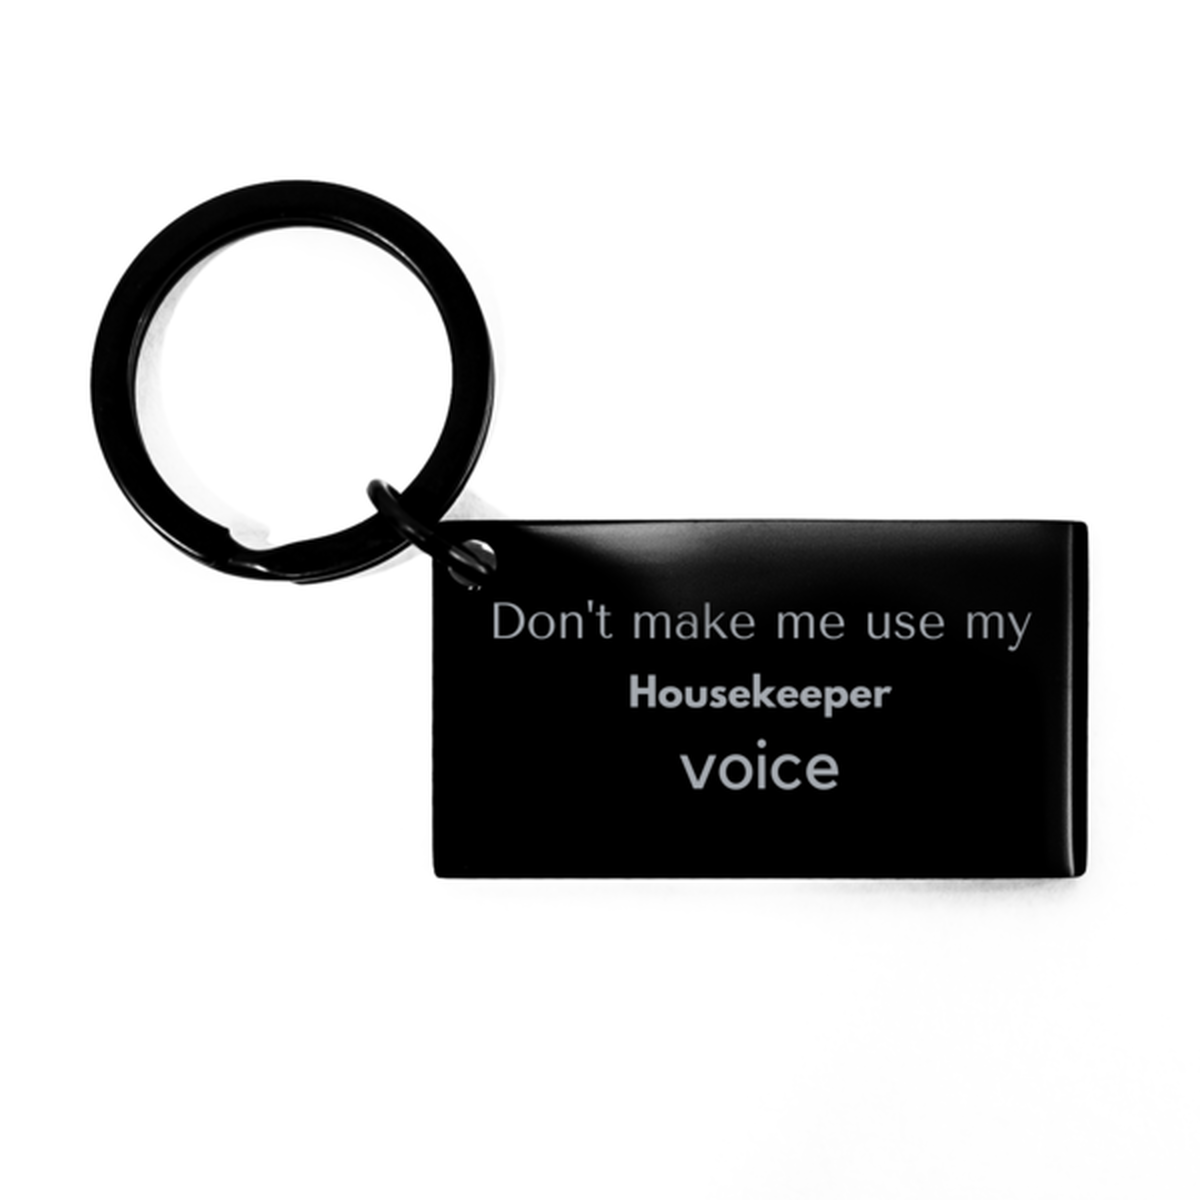 Don't make me use my Housekeeper voice, Sarcasm Housekeeper Gifts, Christmas Housekeeper Keychain Birthday Unique Gifts For Housekeeper Coworkers, Men, Women, Colleague, Friends